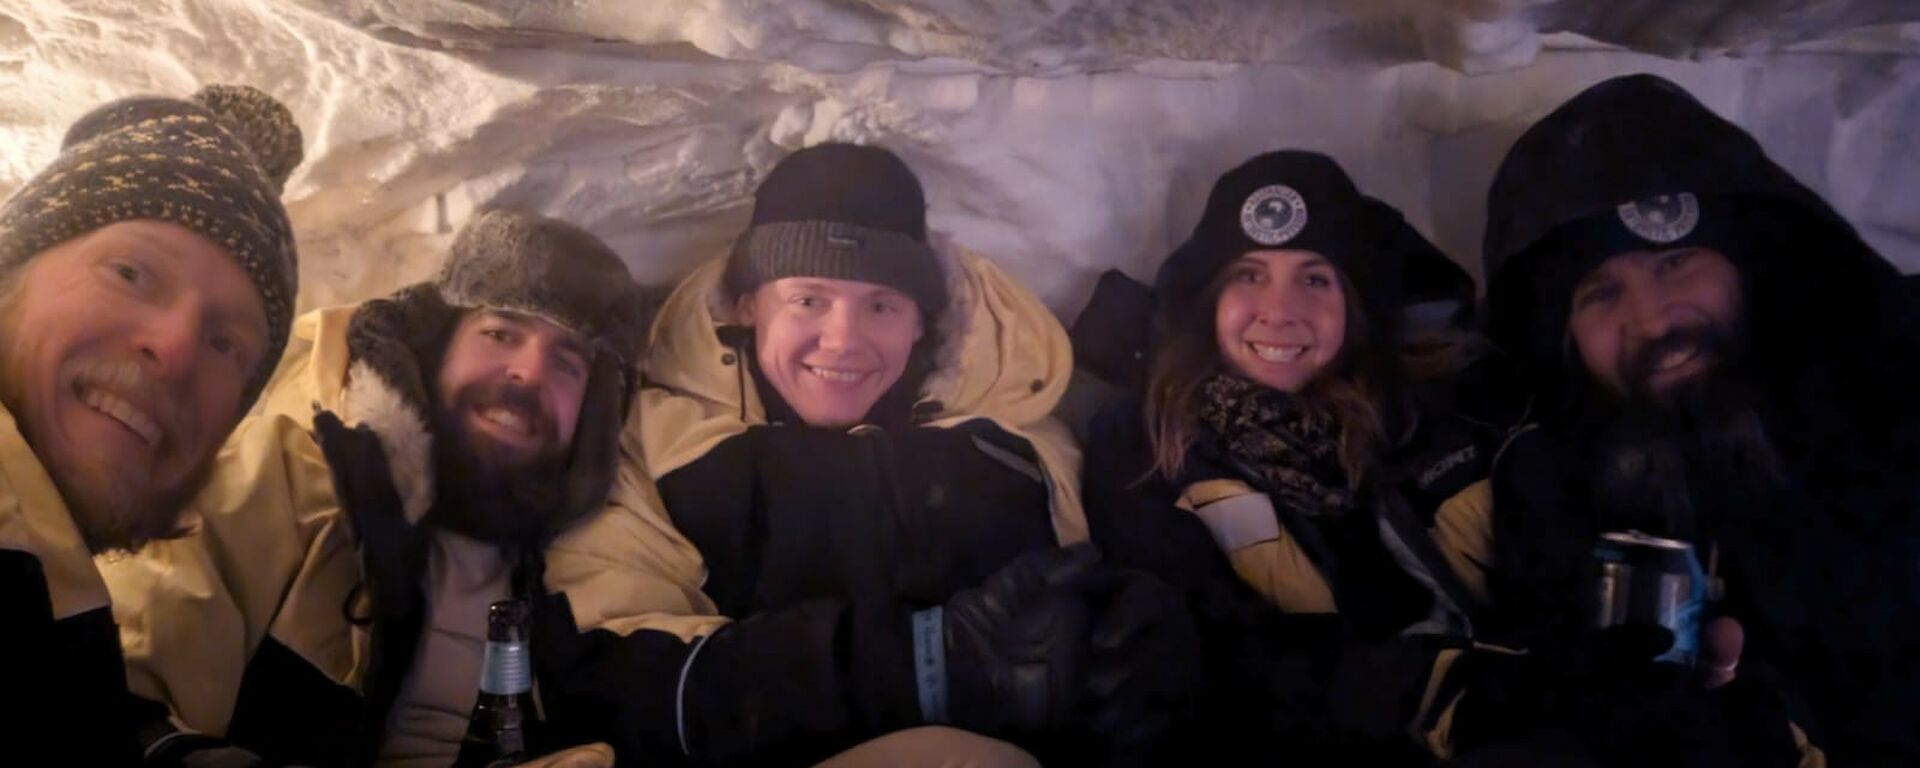 A group of five smiling people sitting inside a snow cave.